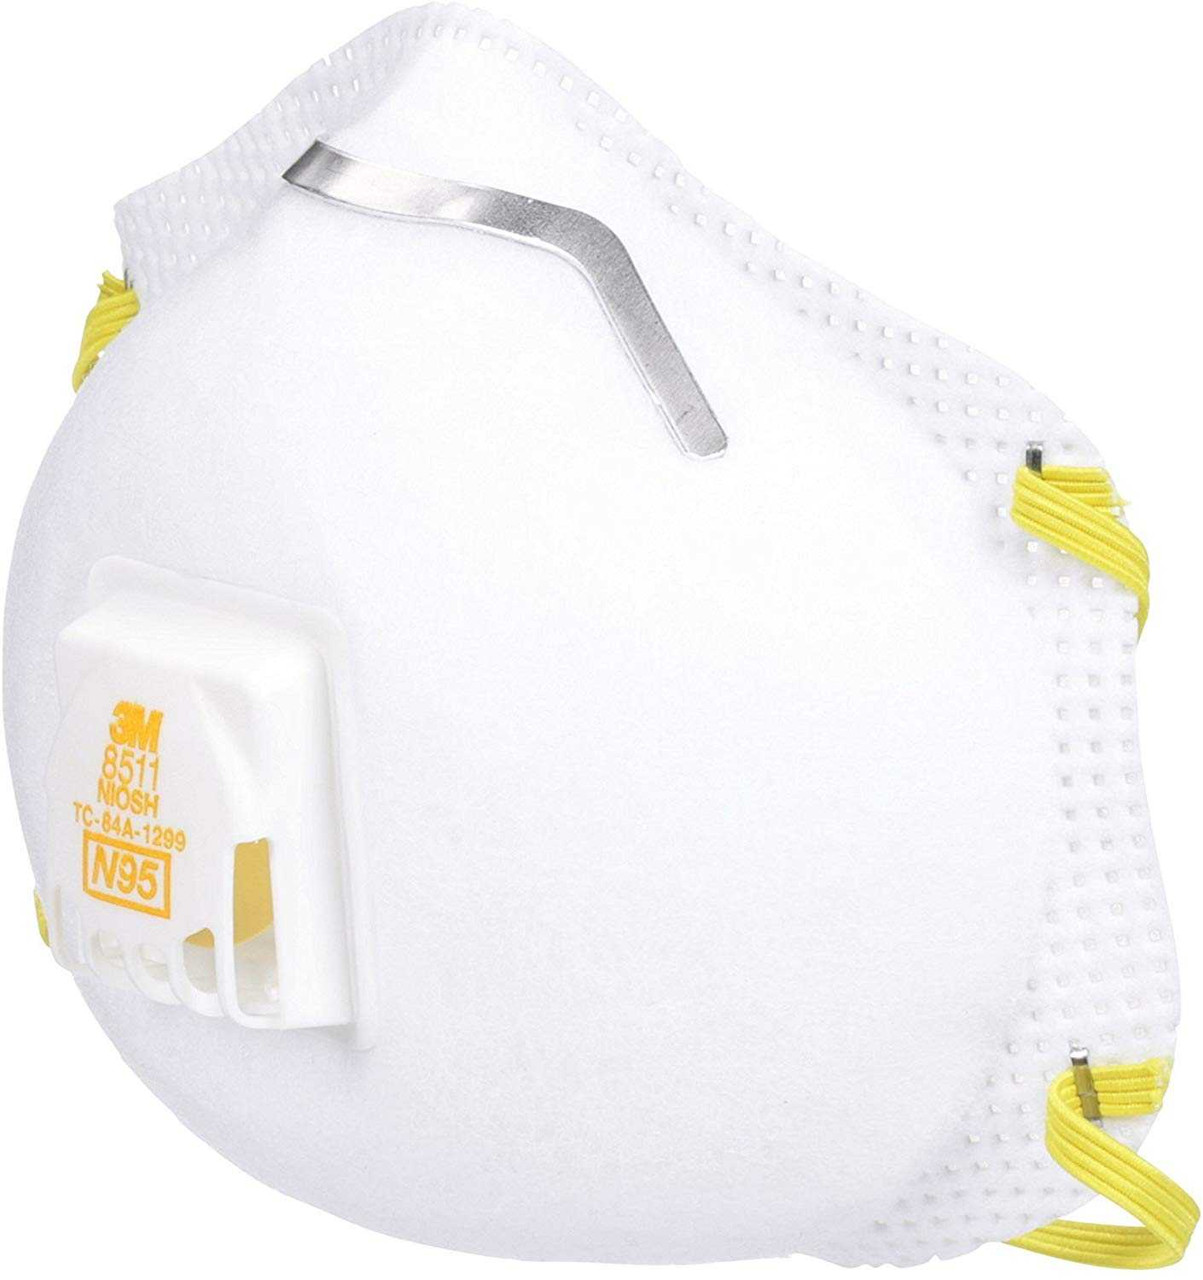 3M 8511 N95 Particulate Respirator Face Mask (Box of 10) 3M Chicken Pieces